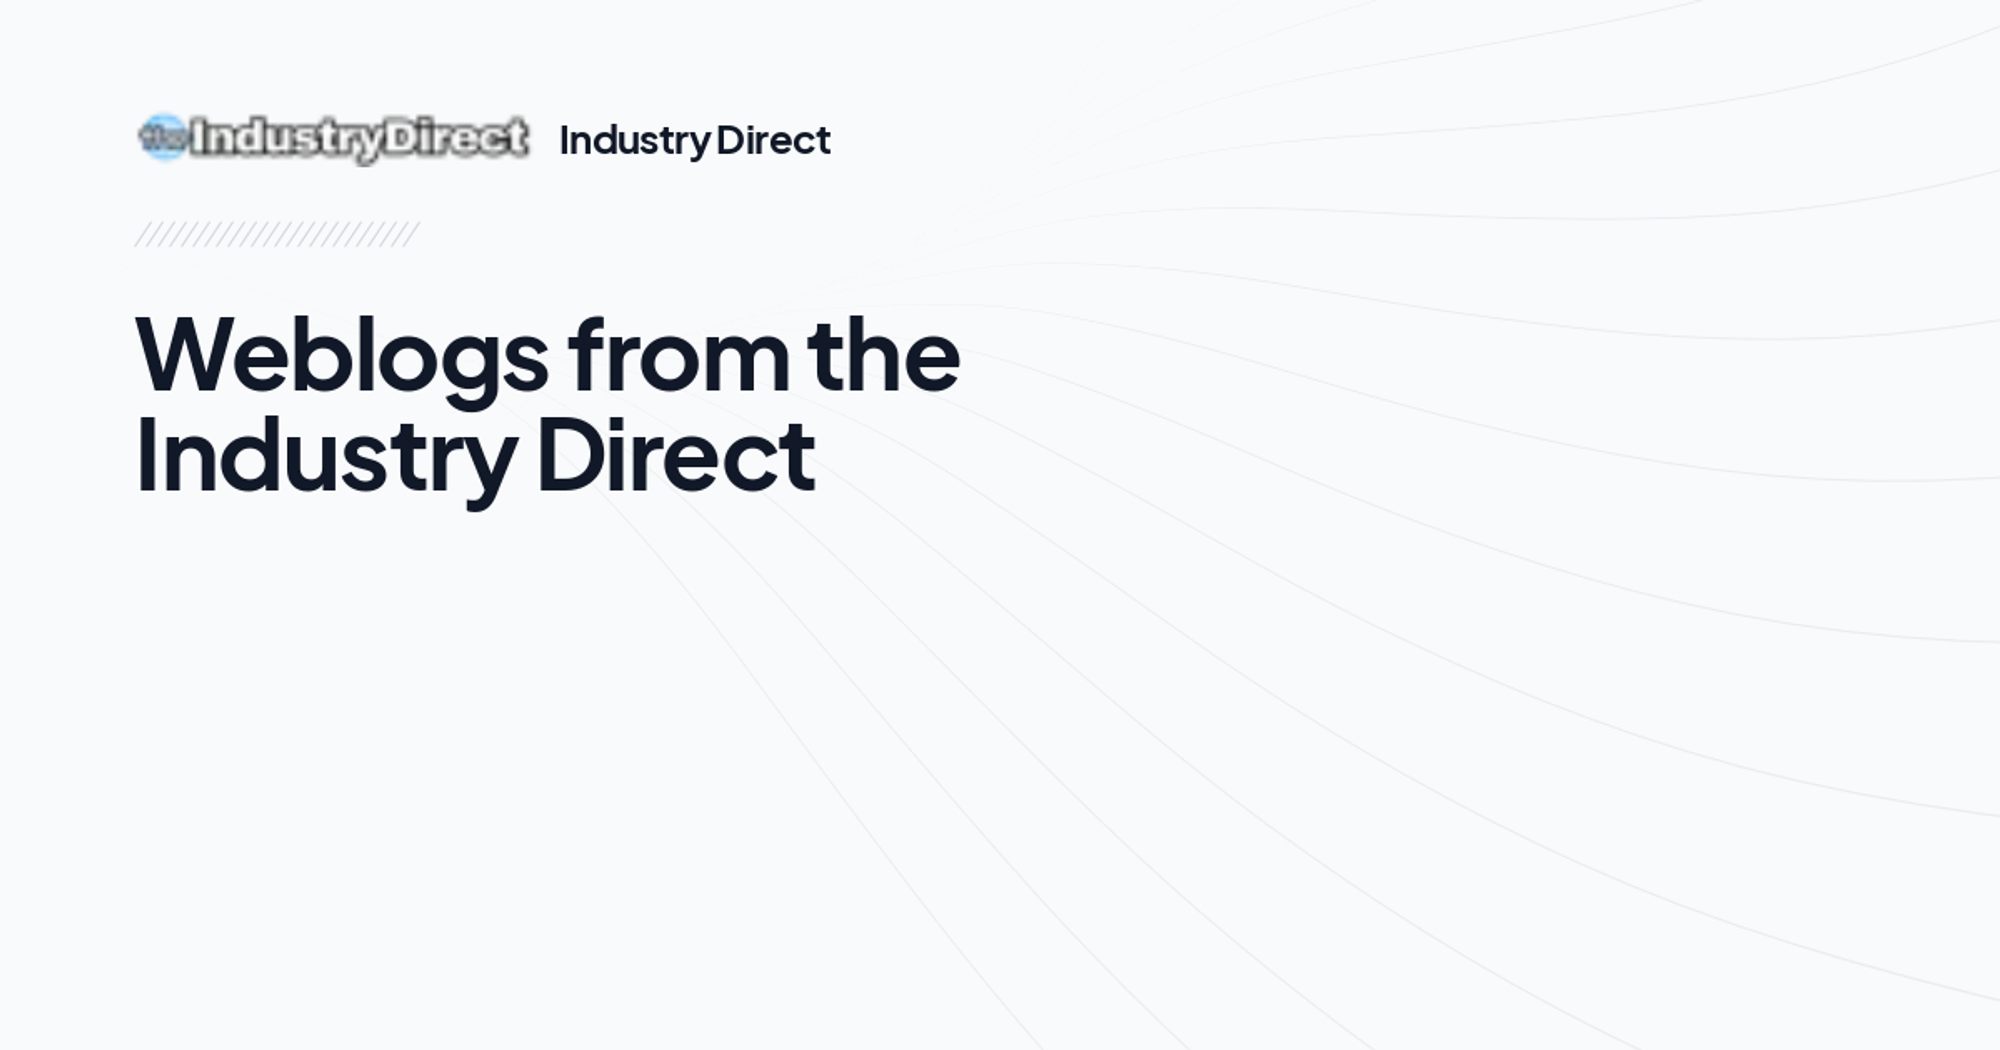 Weblogs from the Industry Direct